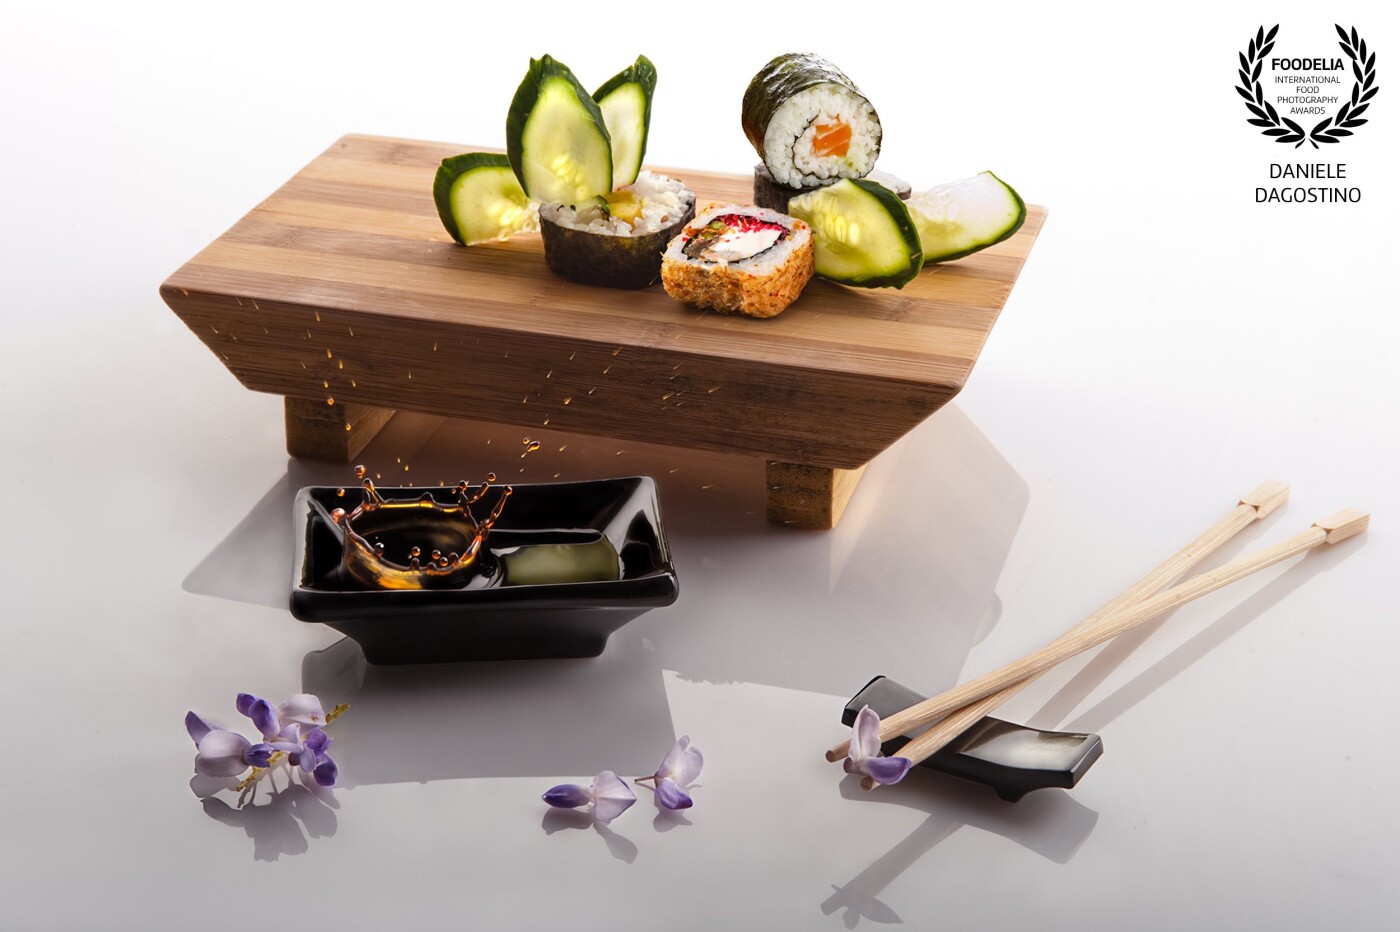 Clean set up for minimal food.<br />
Sushi is a very popular food in the world and all people that lissen sushi word think at the simple ingredients, light colors and delicate flavor. This shot reflect the sushi soul.<br />
Shot by Nikon D810 with 2 strobo lights and 24-70 f.28 nikkor lens,